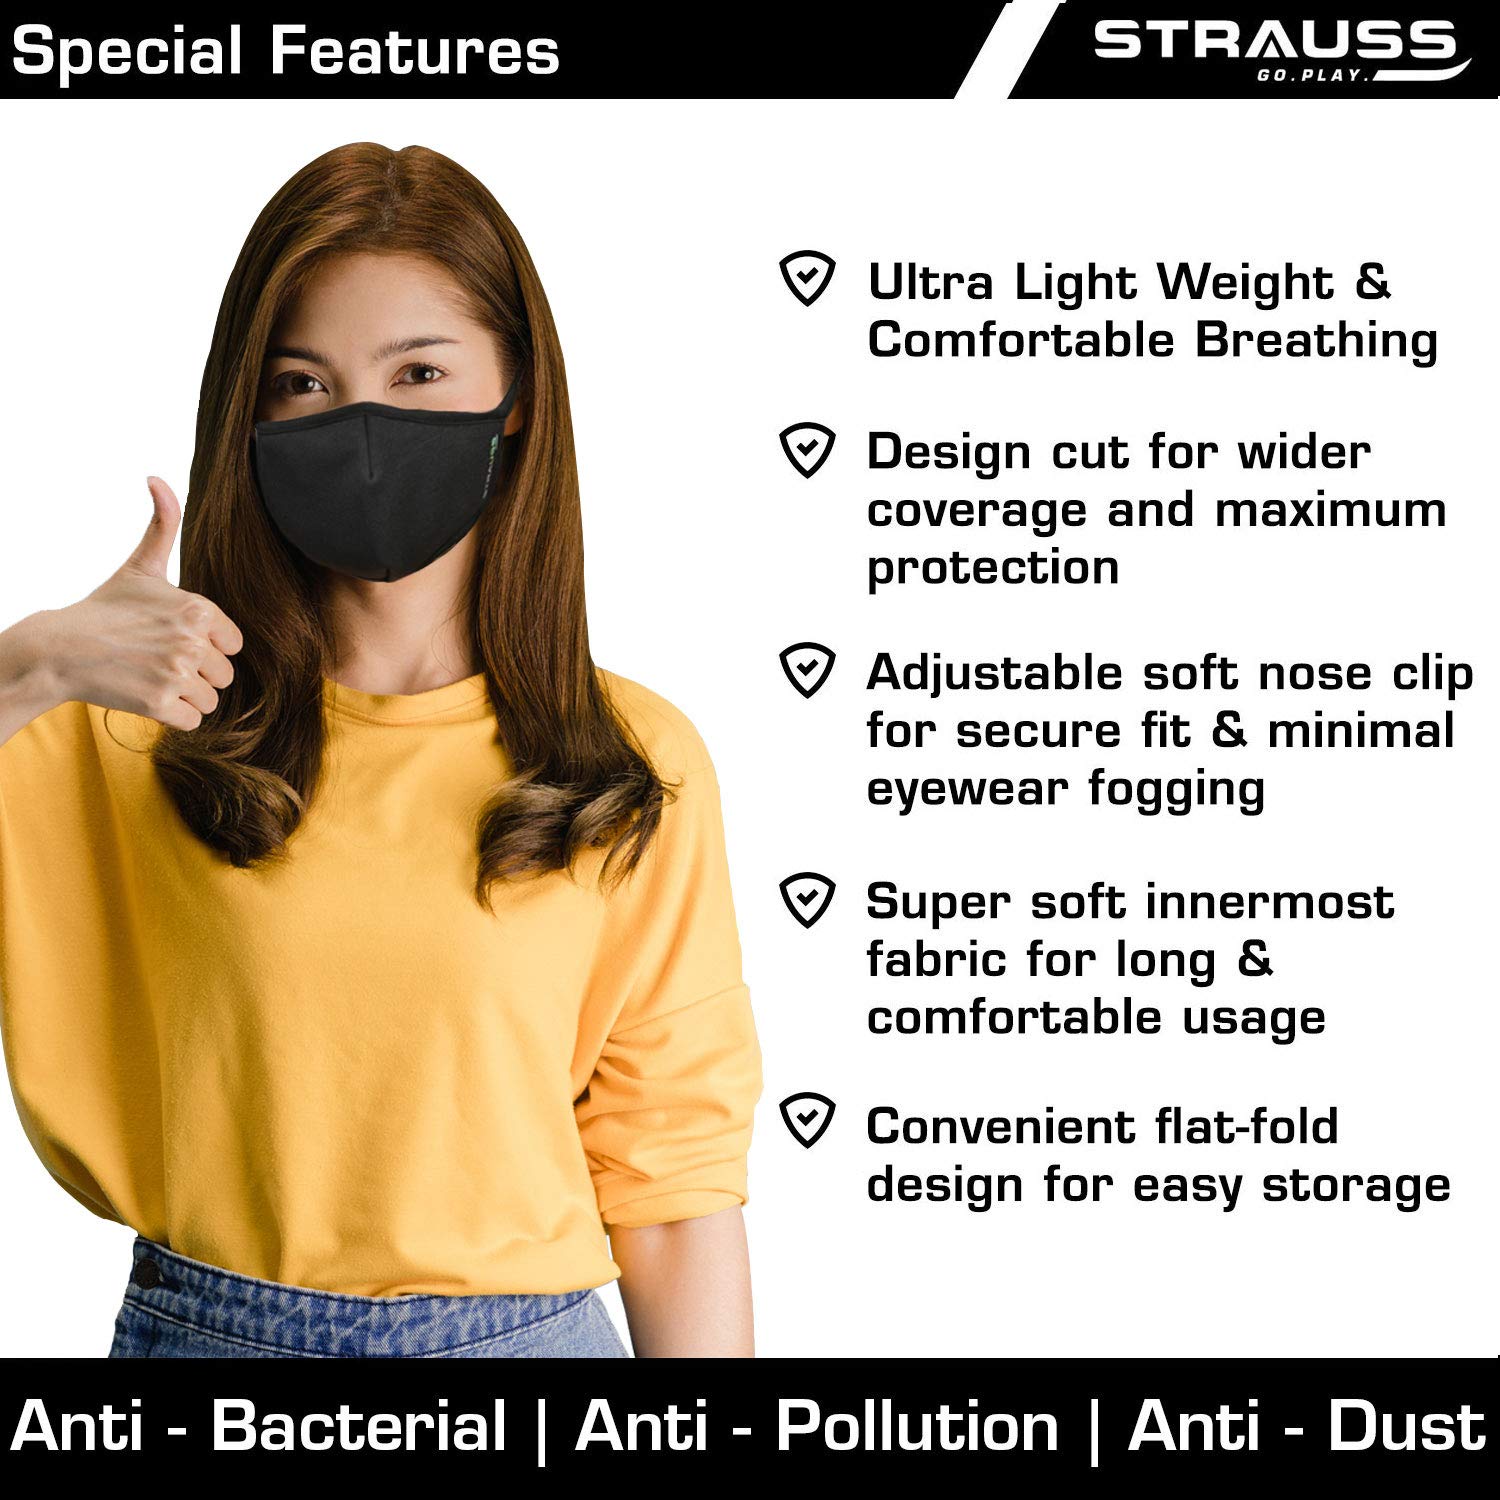 STRAUSS Unisex Anti-Bacterial Protection Mask, Non Vent, Large, (Black)